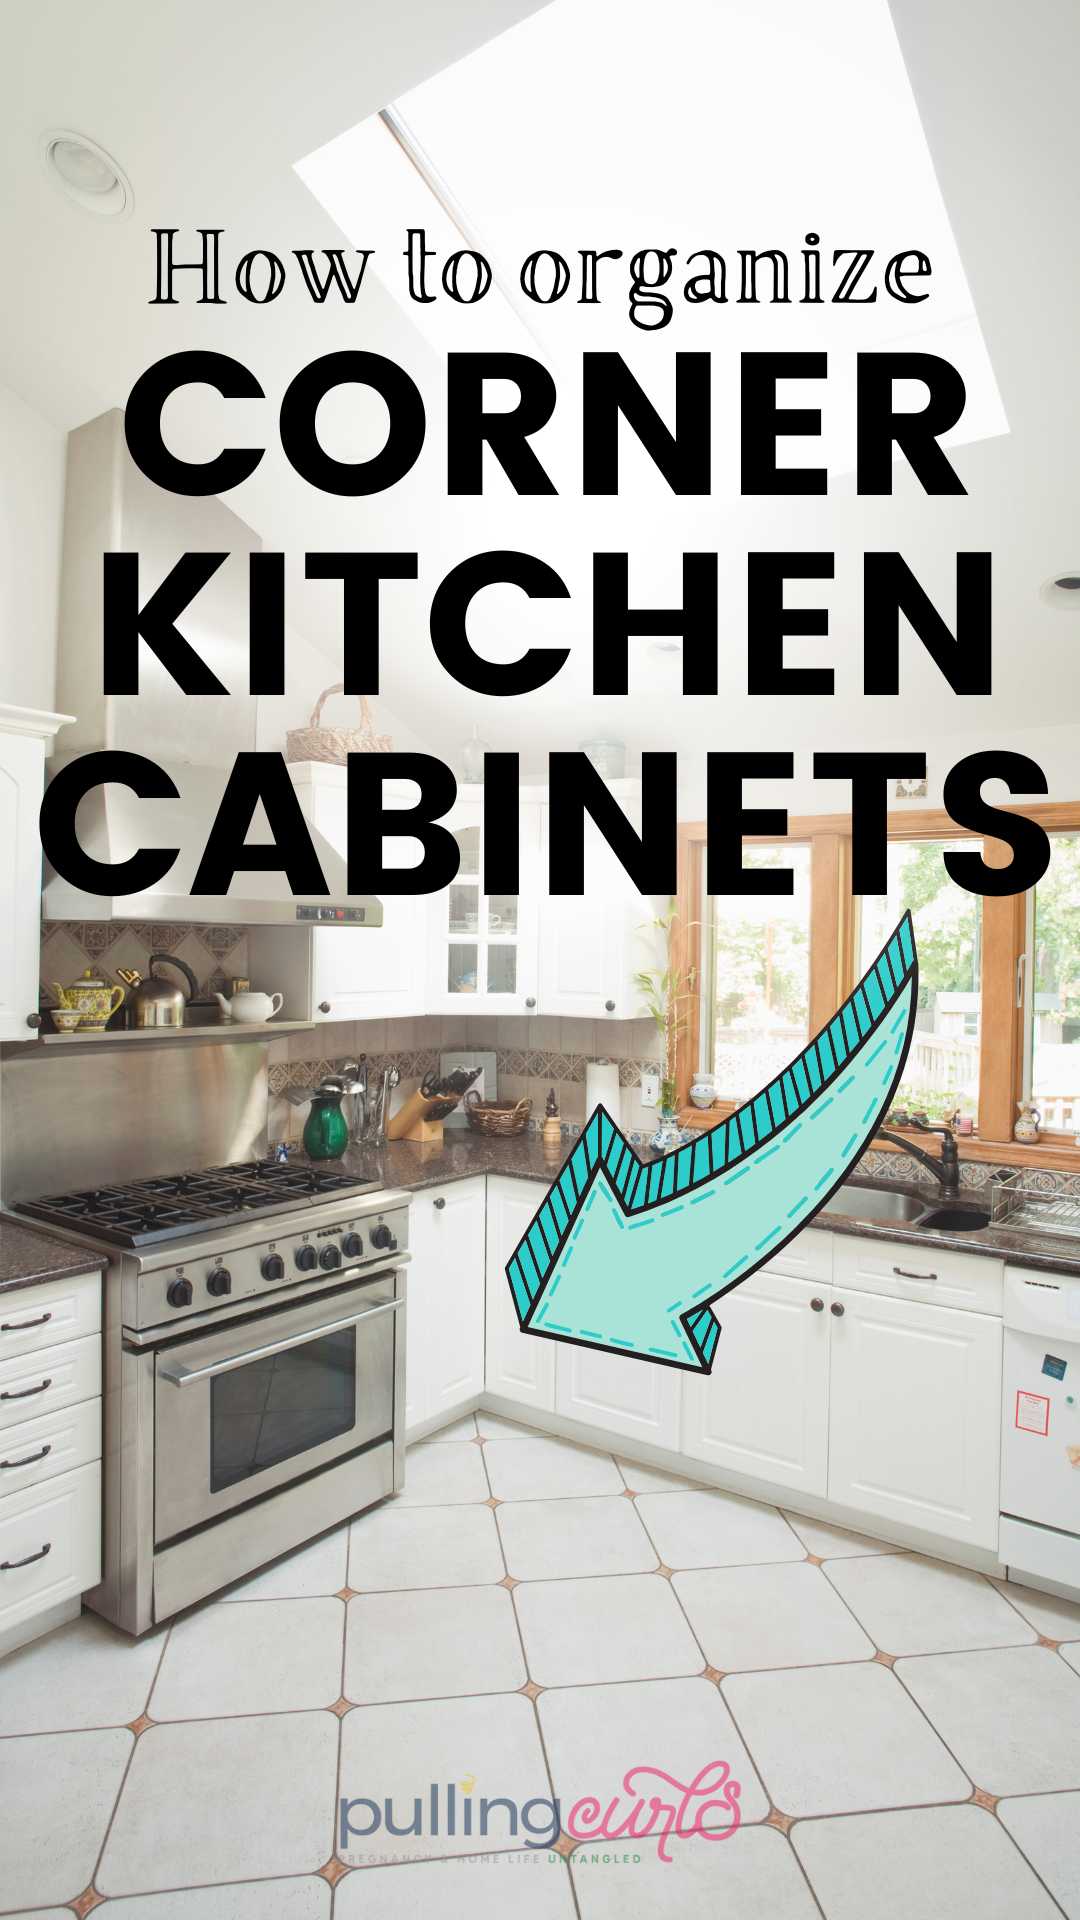 How to Organize Corner Cabinets